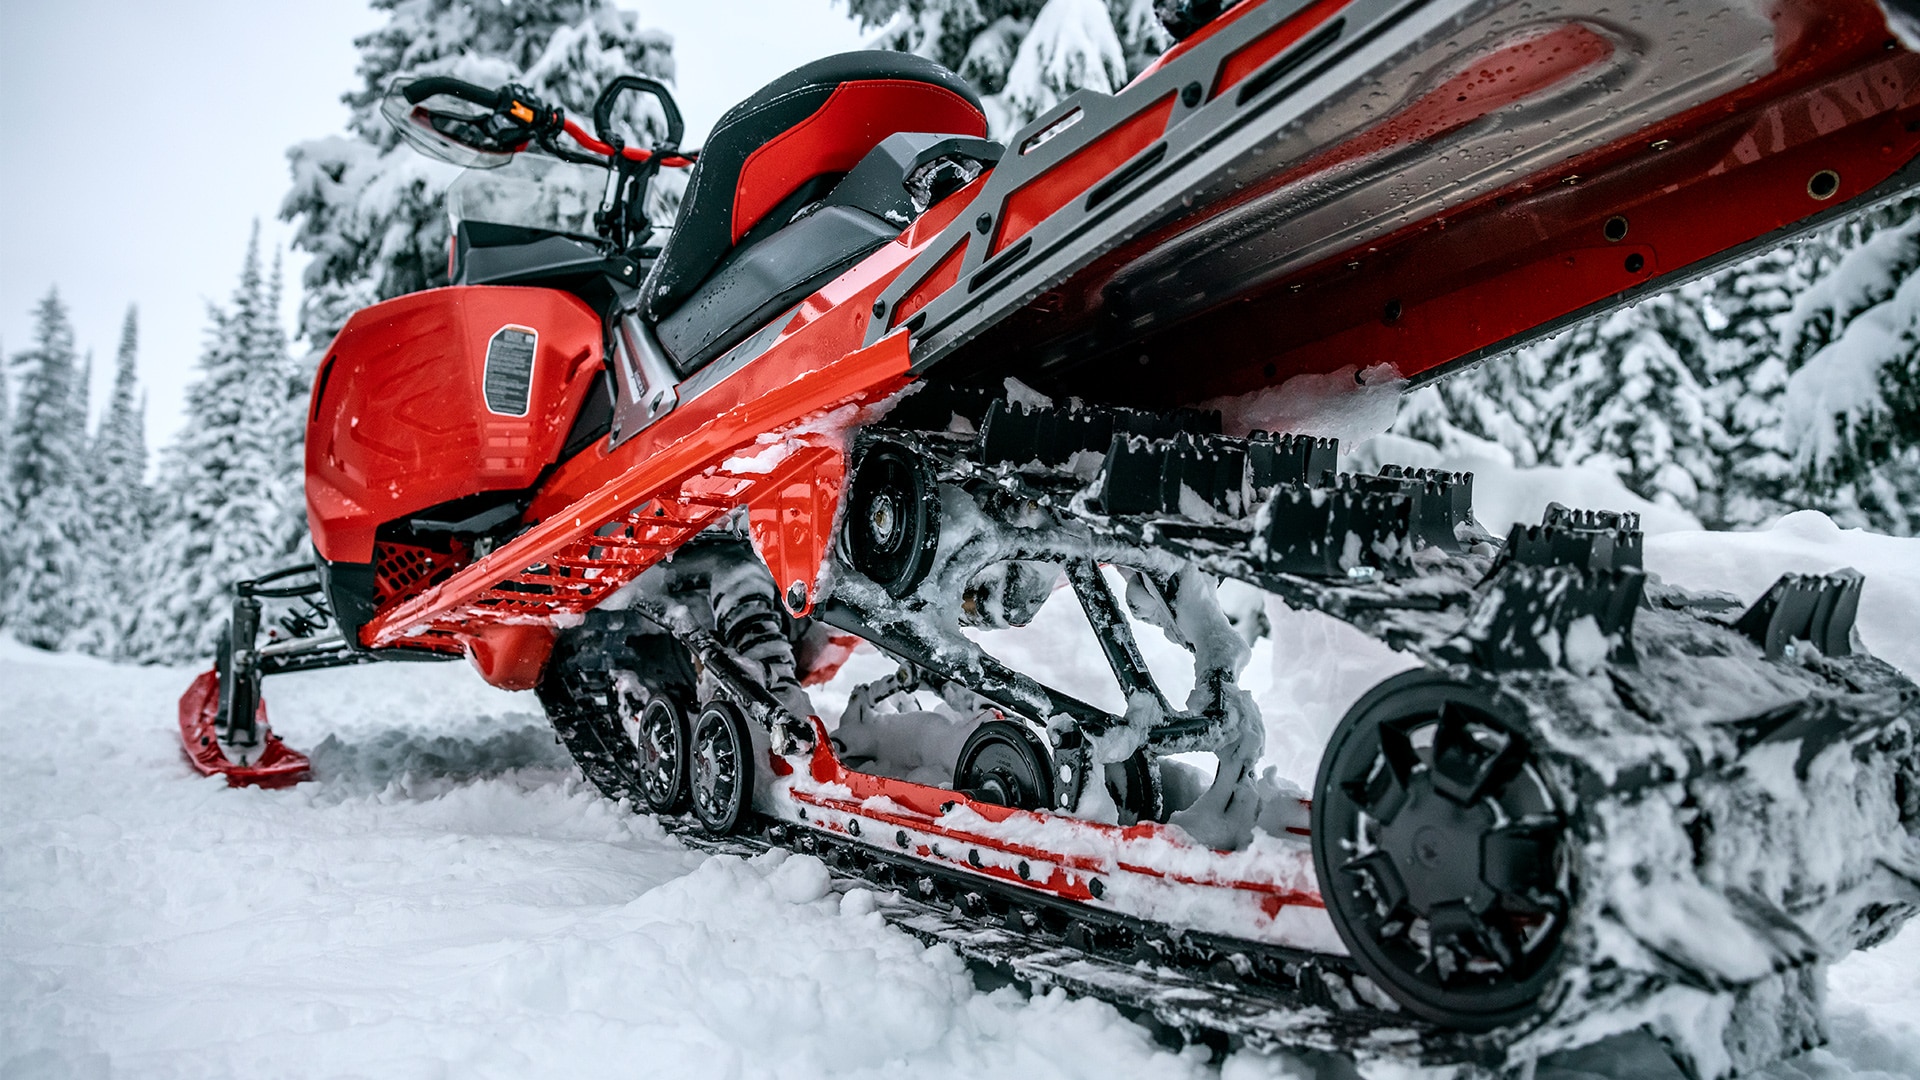 Close up of the 2023 Lynx Xterrain snowmobile track